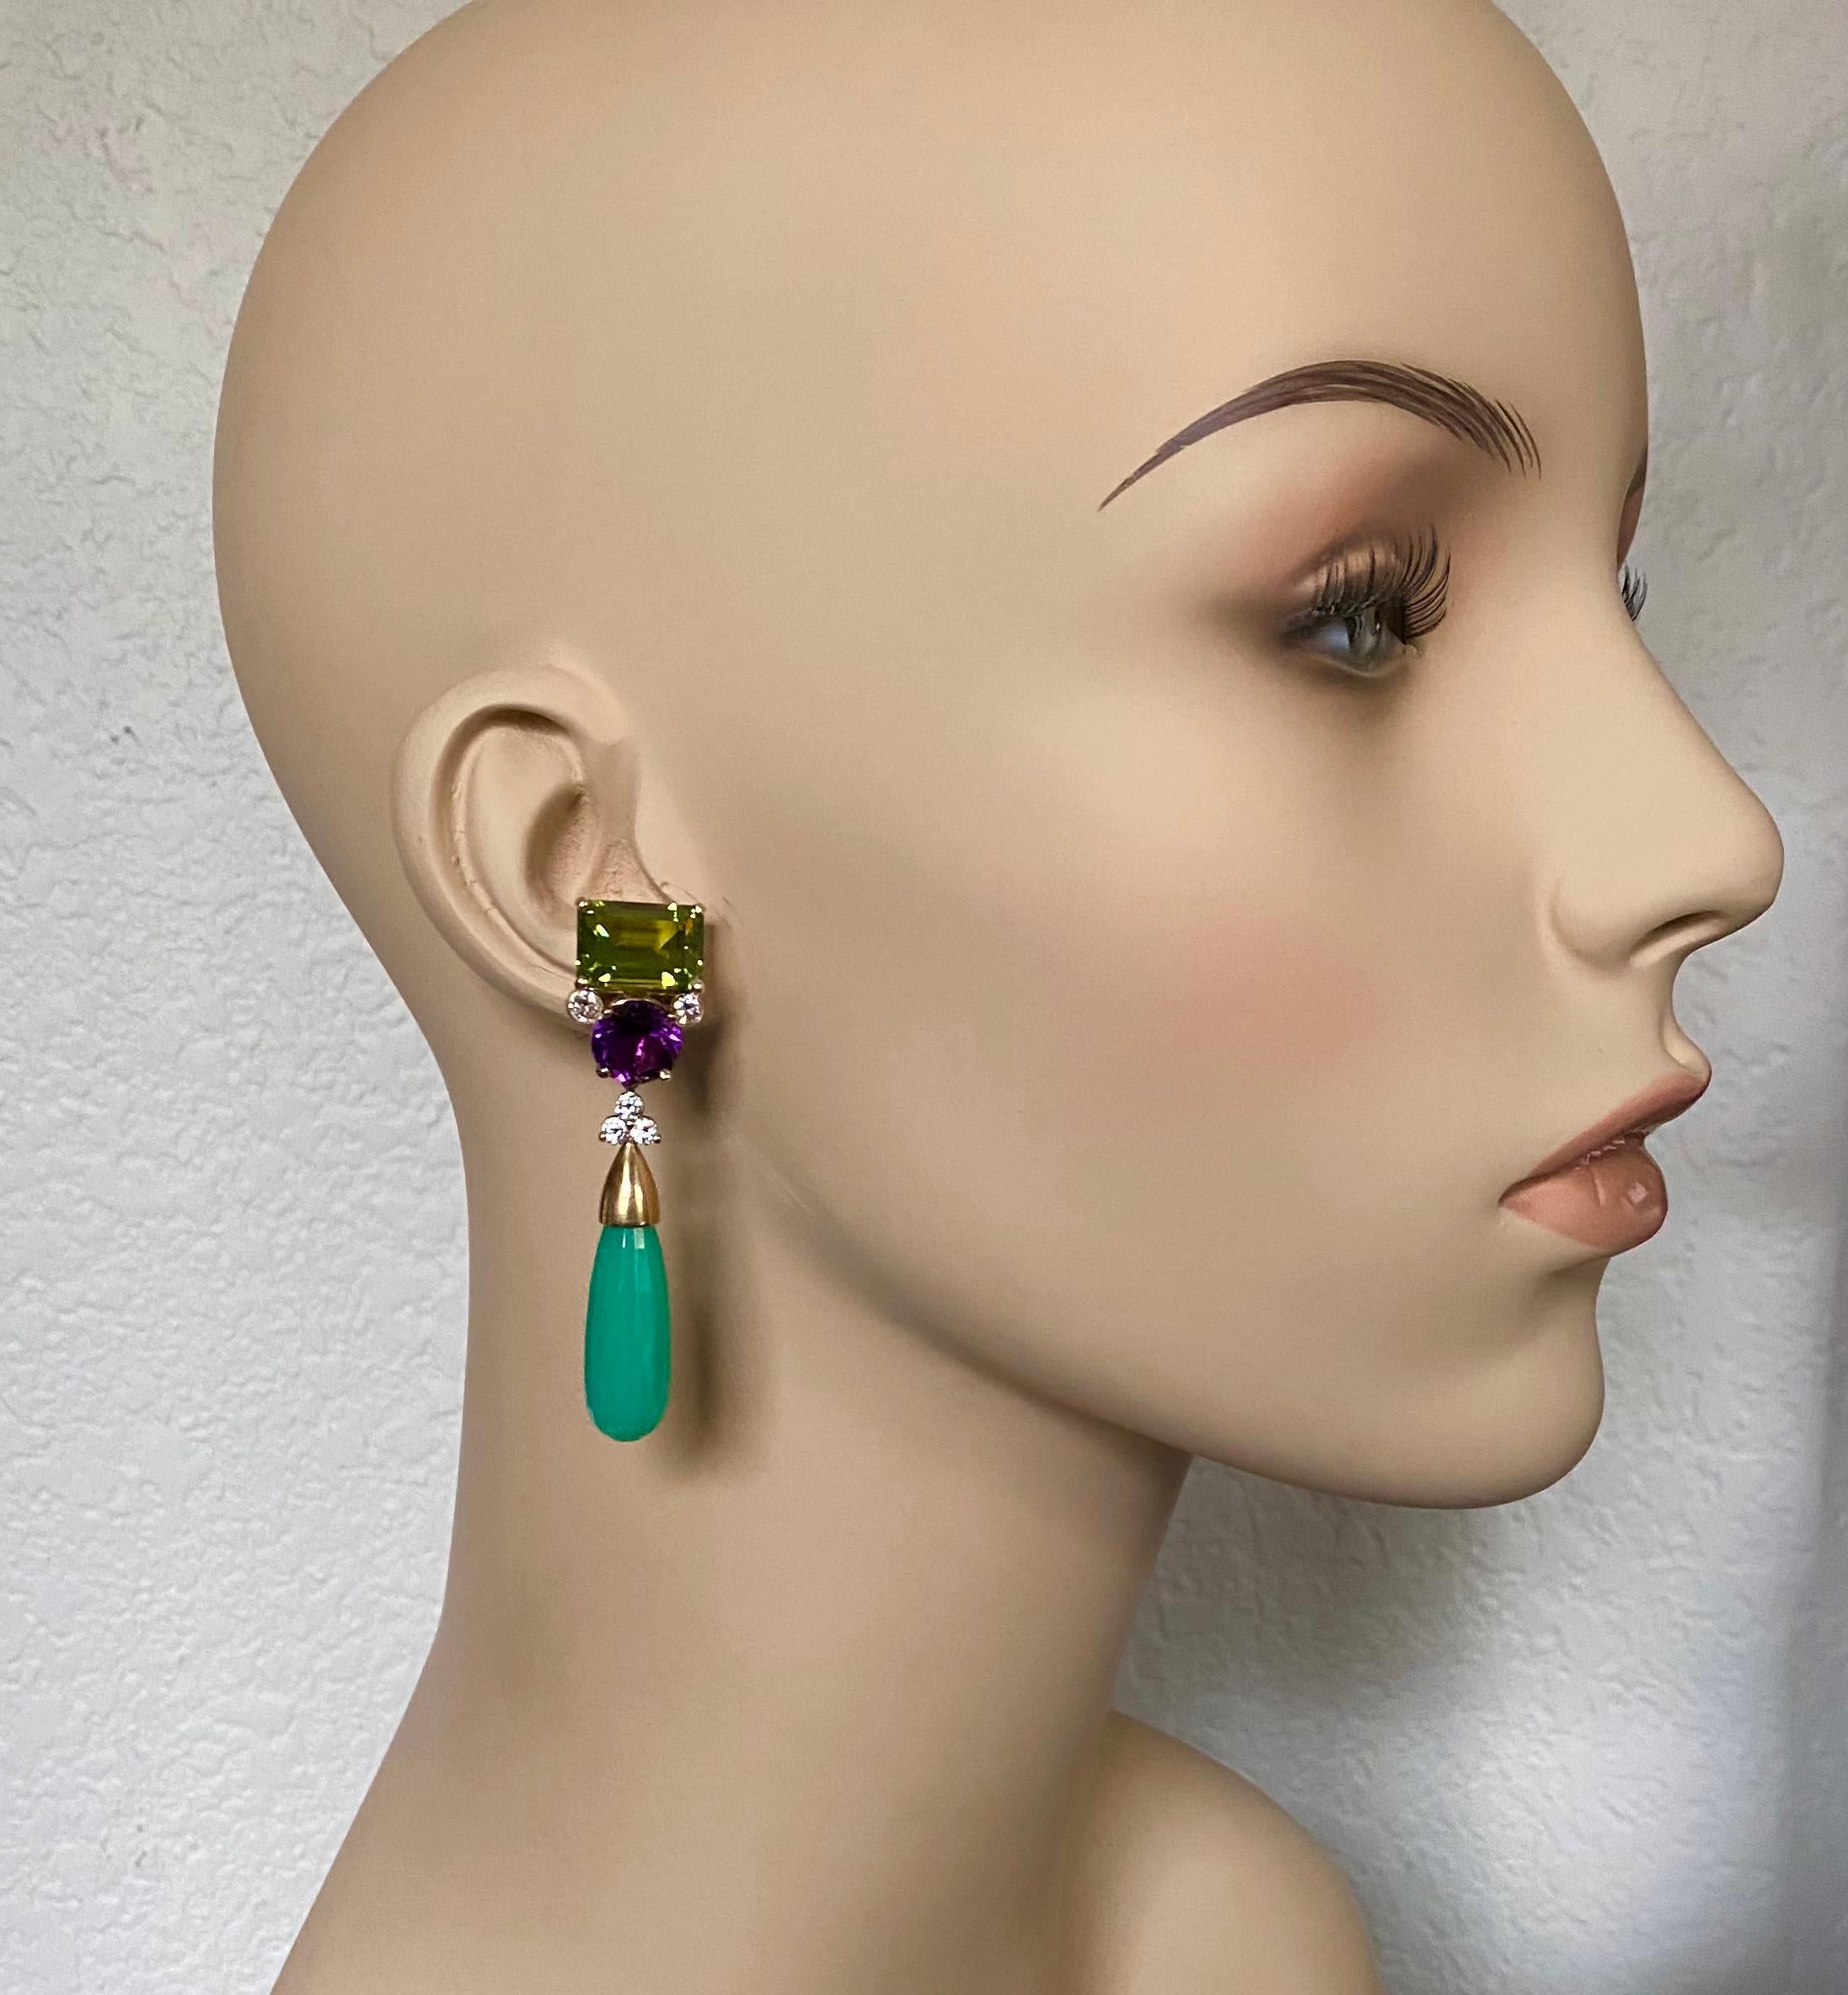 Peridot and amethyst are paired along with detachable chrysoprase drops in these dynamic dangle earrings.  The gem quality peridot (origin: Pakistan) are the classic yellow/green color and are a perfect foil to the richly colored amethyst (origin: